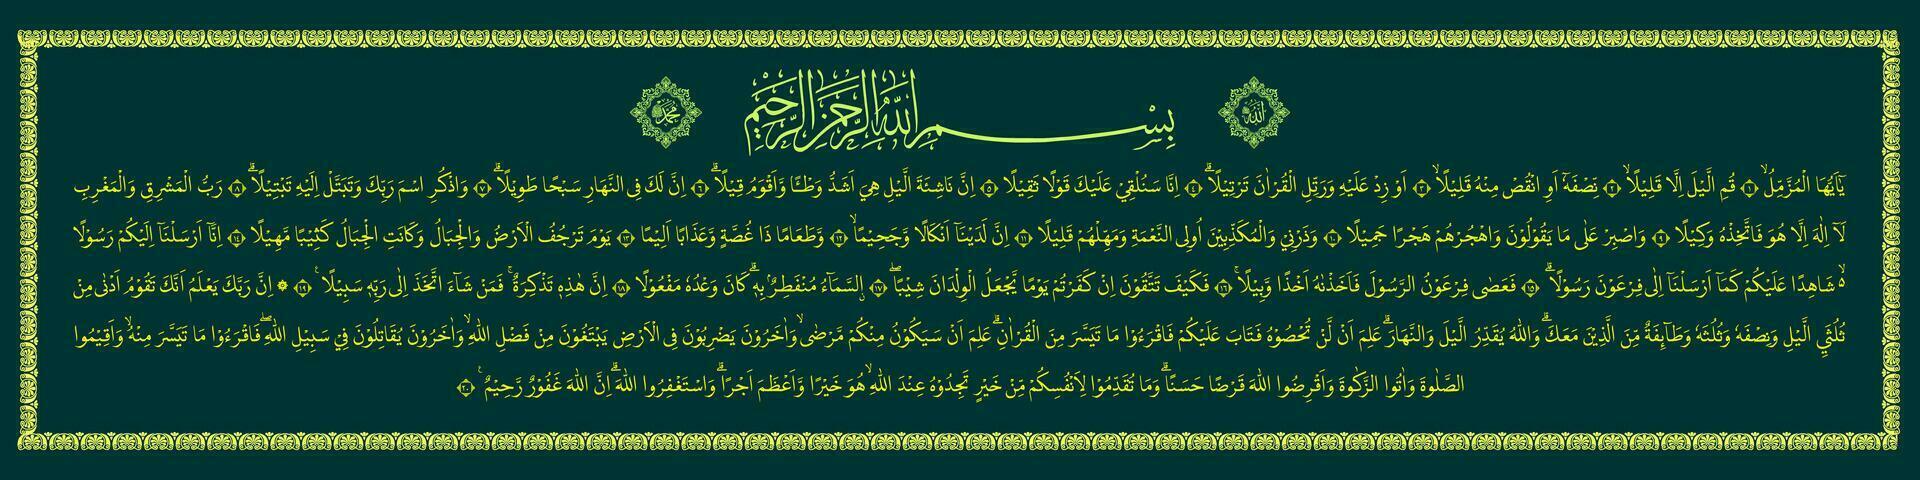 Arabic calligraphy of Surah Al Muzammil 1-20 which means Really, this is a warning. Whoever wills, surely he will take the straight path to his Lord. vector